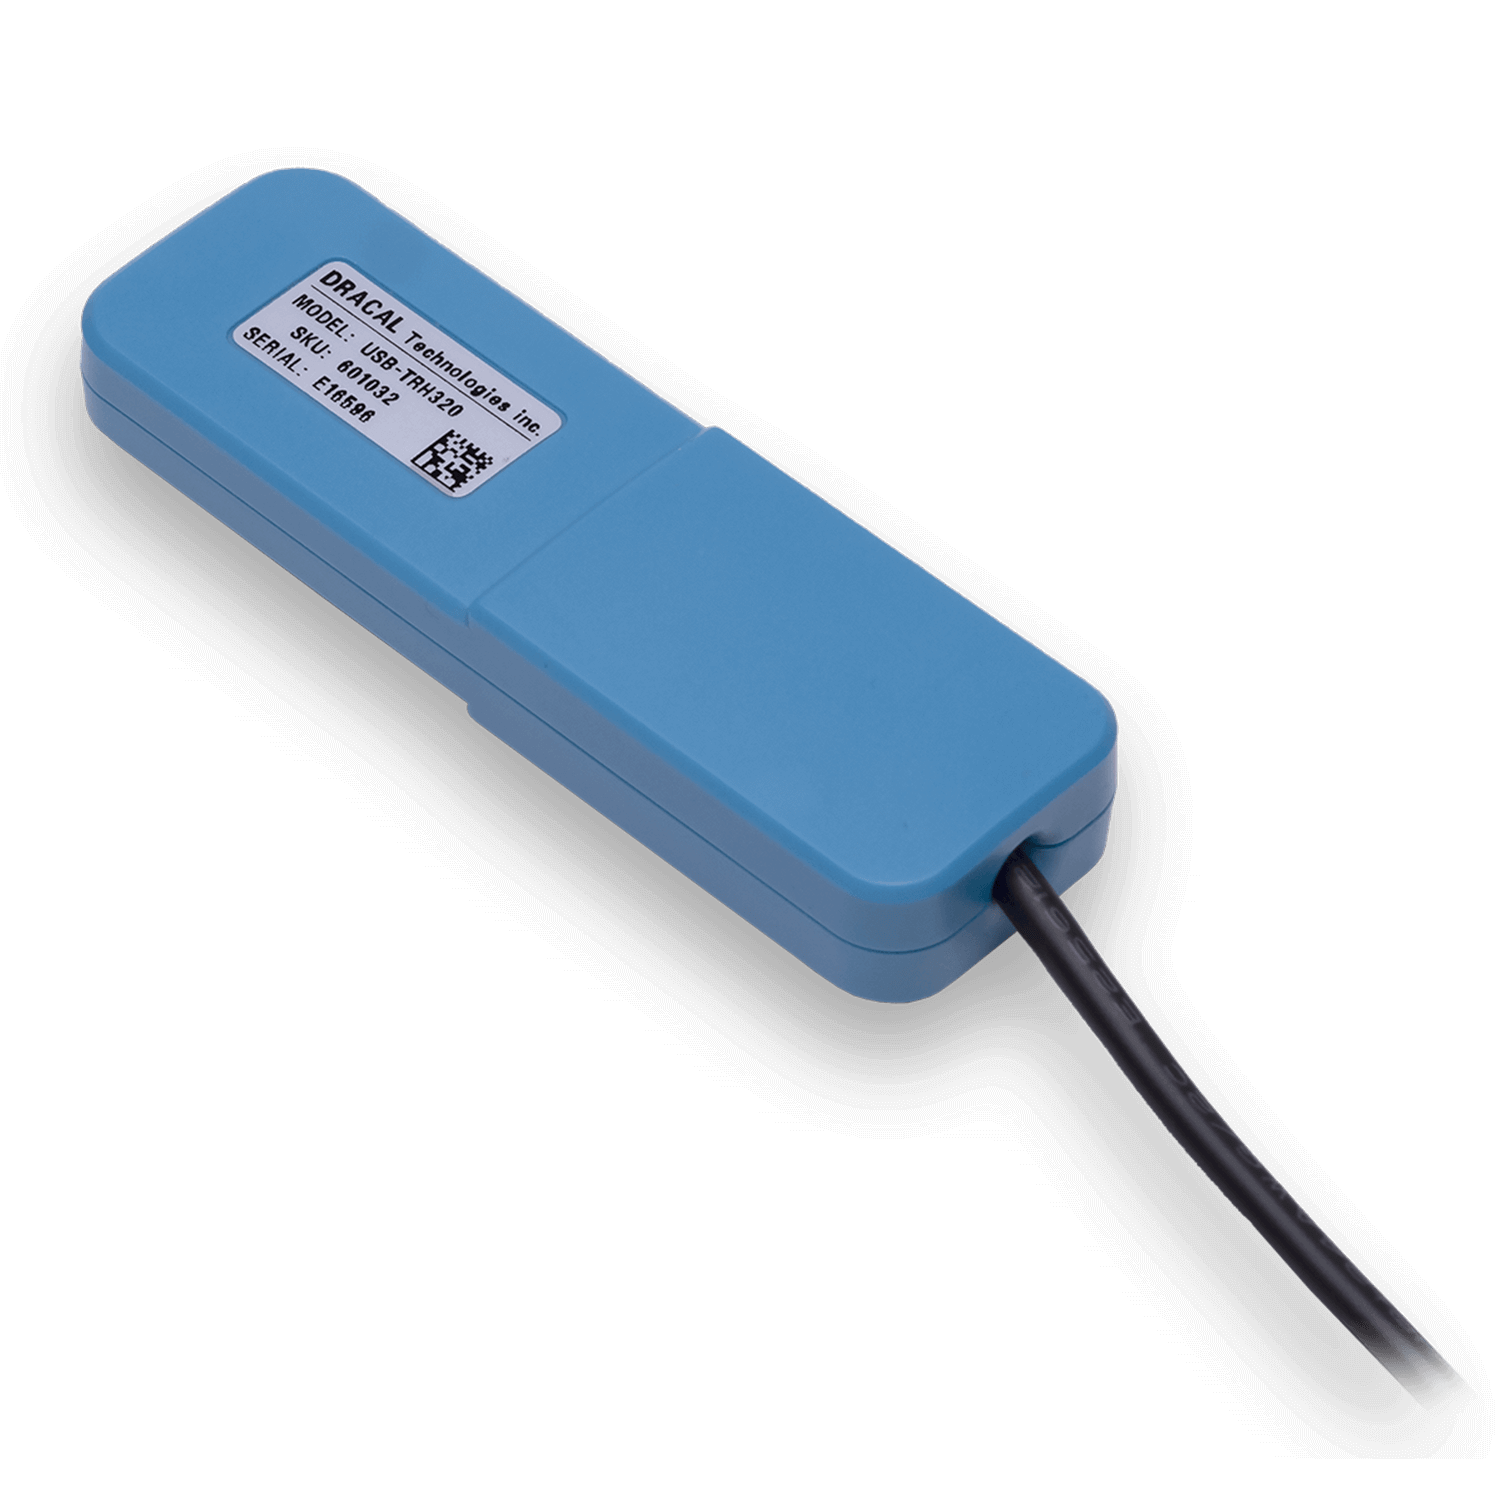 TRH320: Temperature and relative humidity USB sensor - Back View with cable